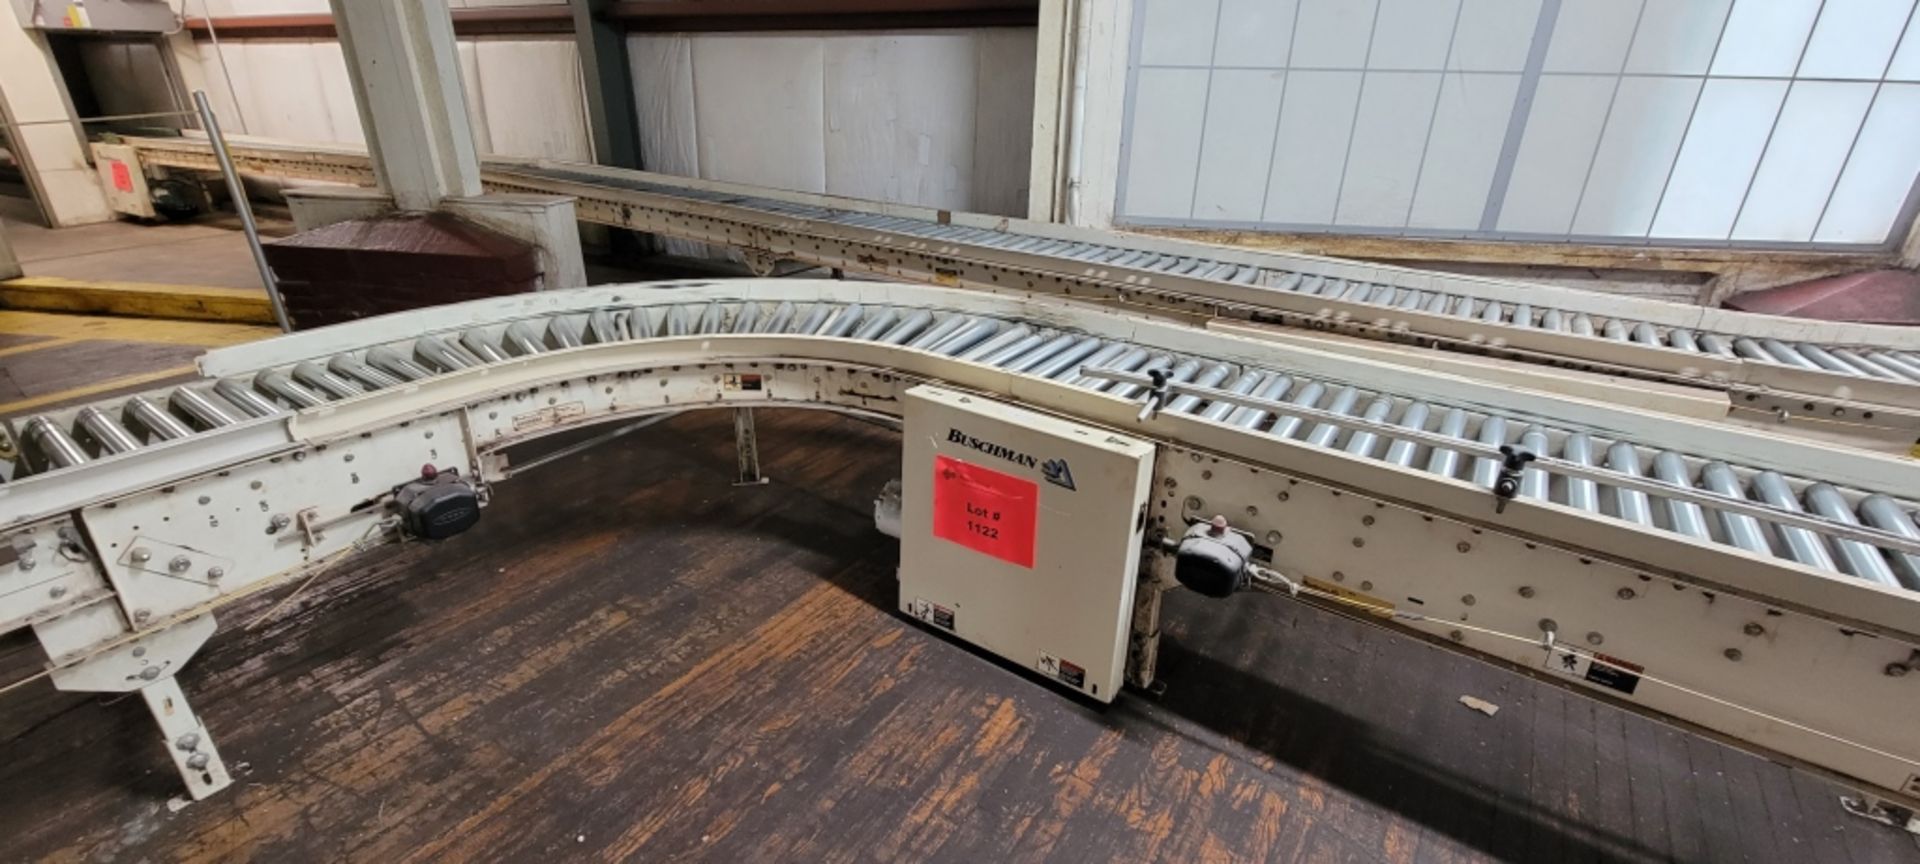 Buschman Inclined Conveyor System - BULK BID FOR LOTS 1118 TO 1125 - Image 9 of 12